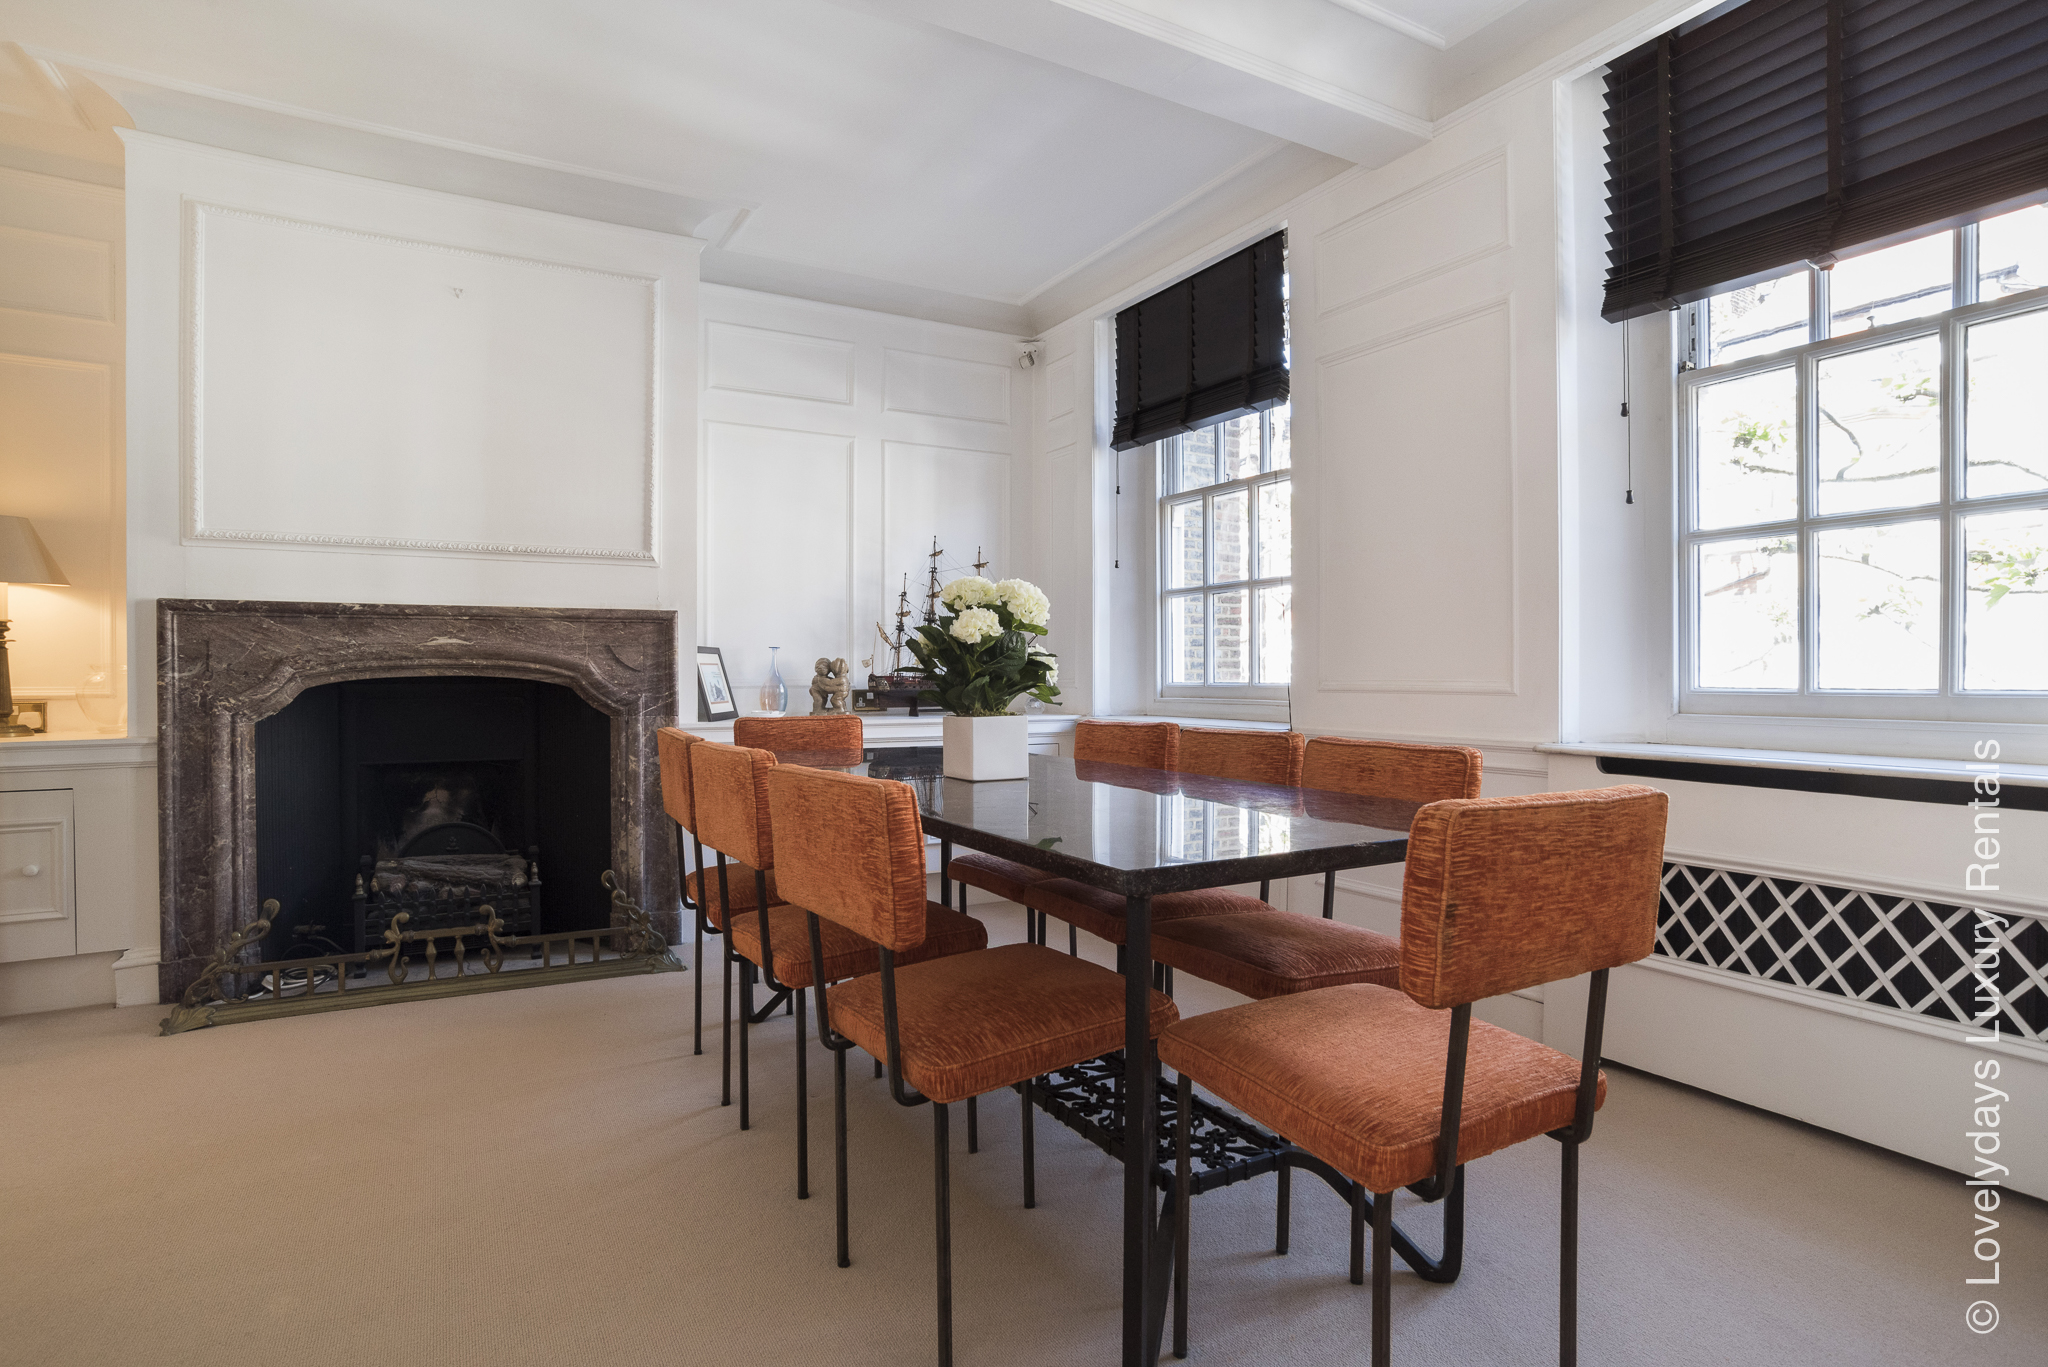 <p>Lovelydays Luxury Rentals introduce you pictures of a charming Apartment in the heart of Chelsea in London.</p>